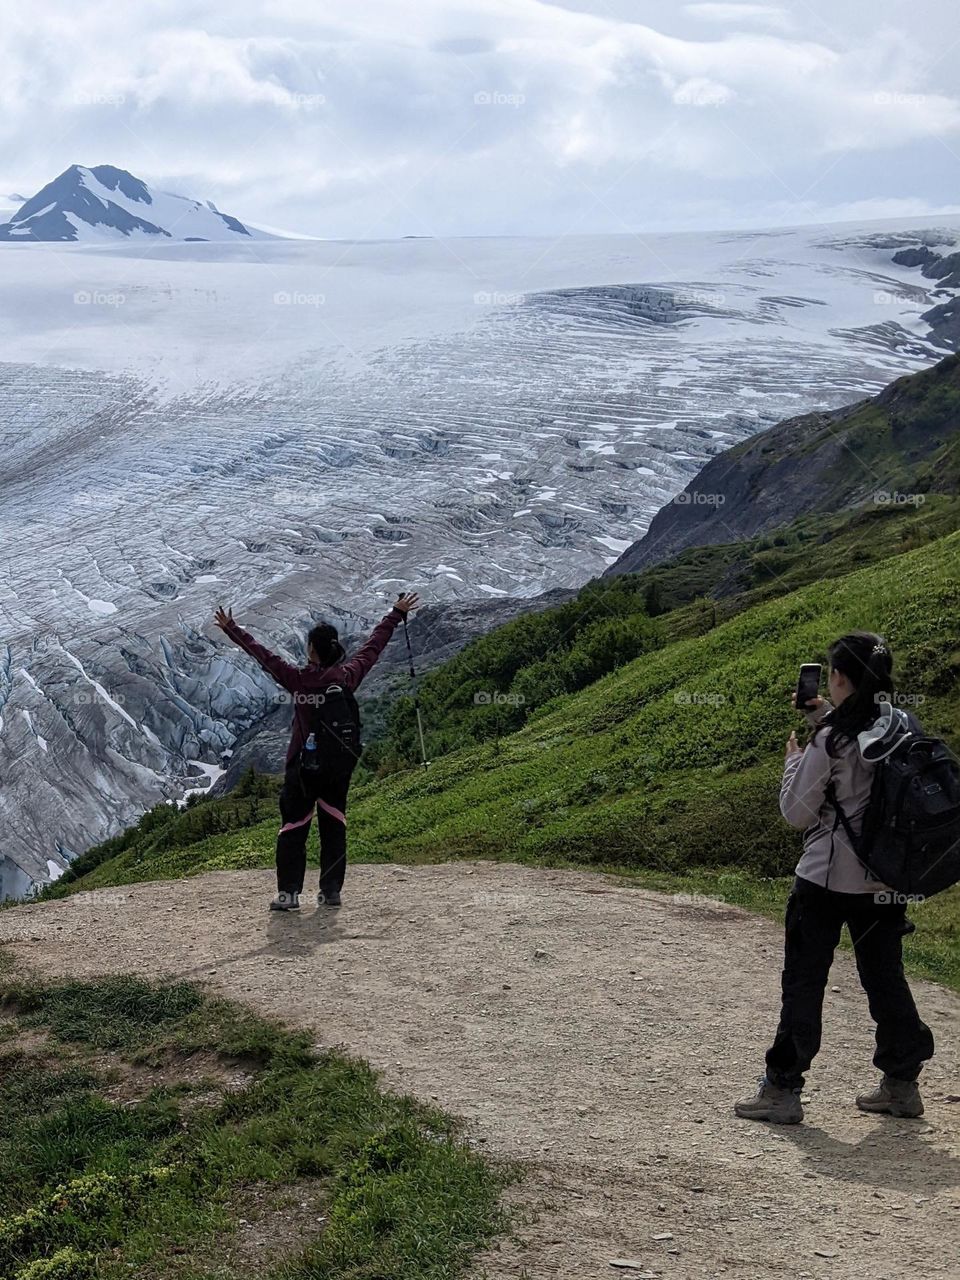 staging a photomoment in front of a glacier